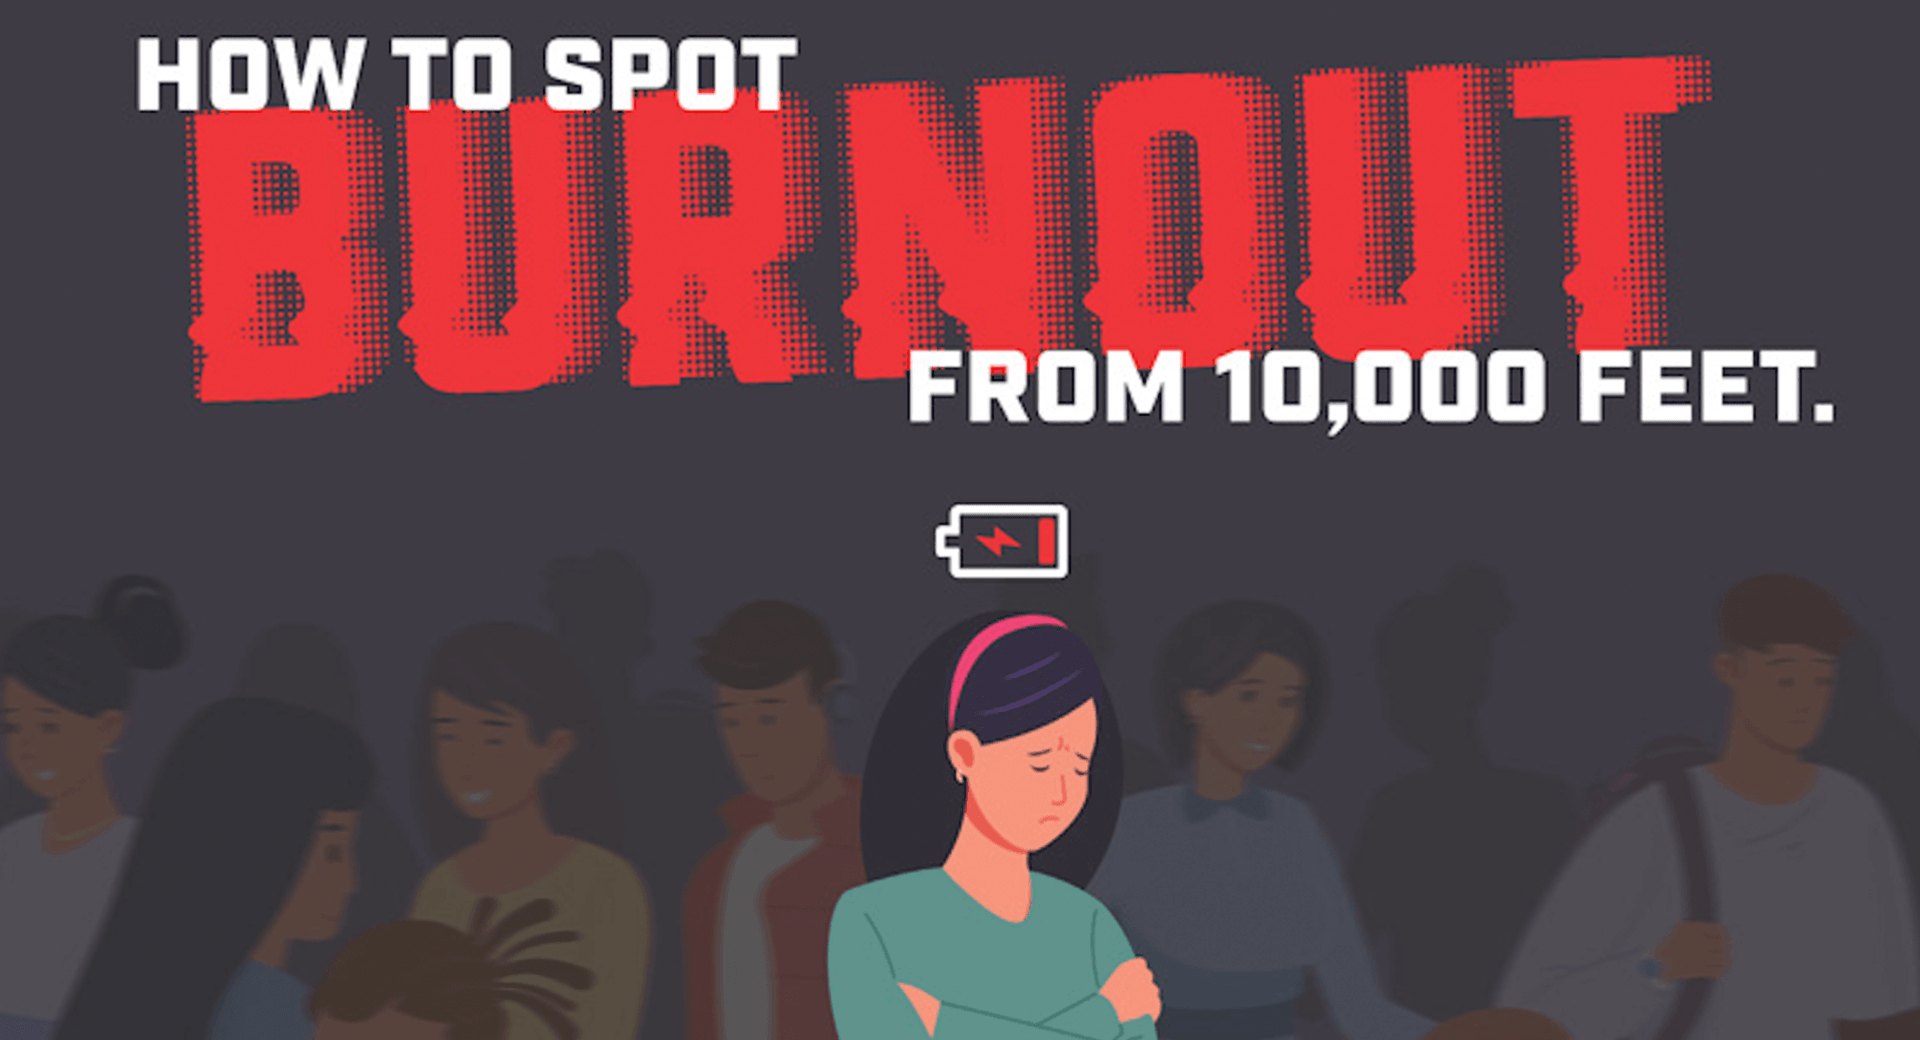 Infographic: How to Spot Burnout from 10,000 Feet